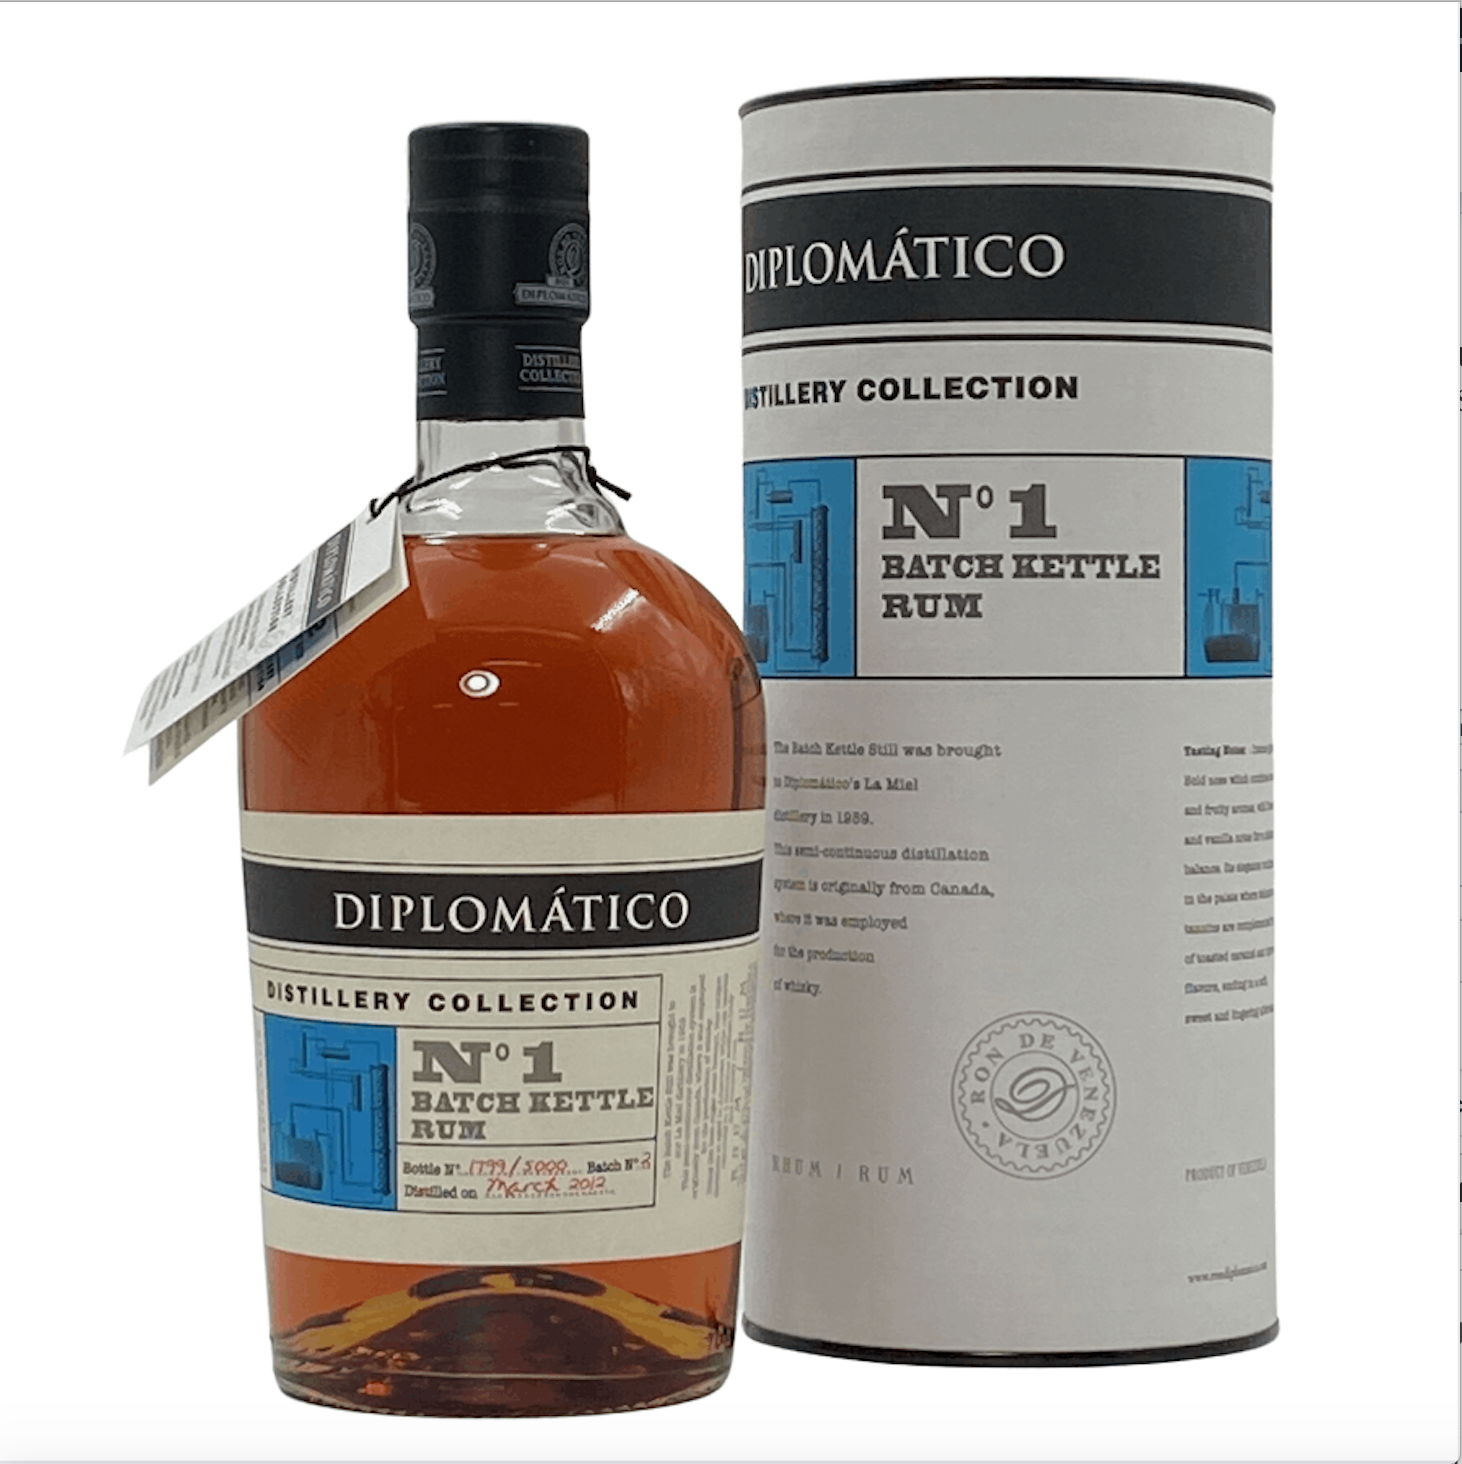 Diplomatico Distillery Collection N°1 Batch Kettle